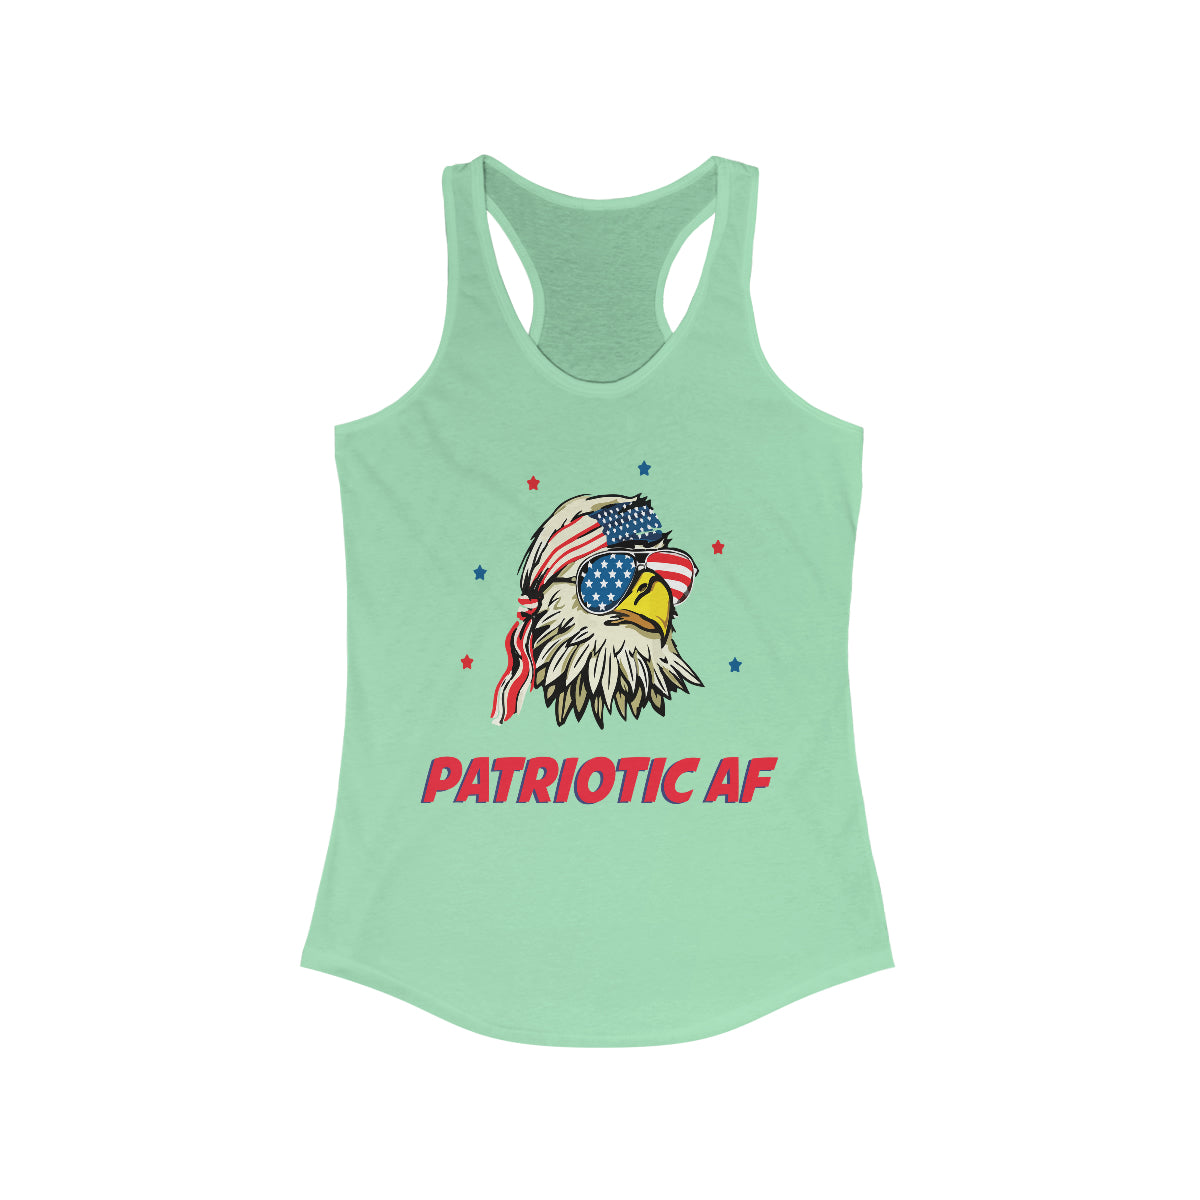 Patriotic AF with American Eagle | Women's Racerback Tank - Rise of The New Media